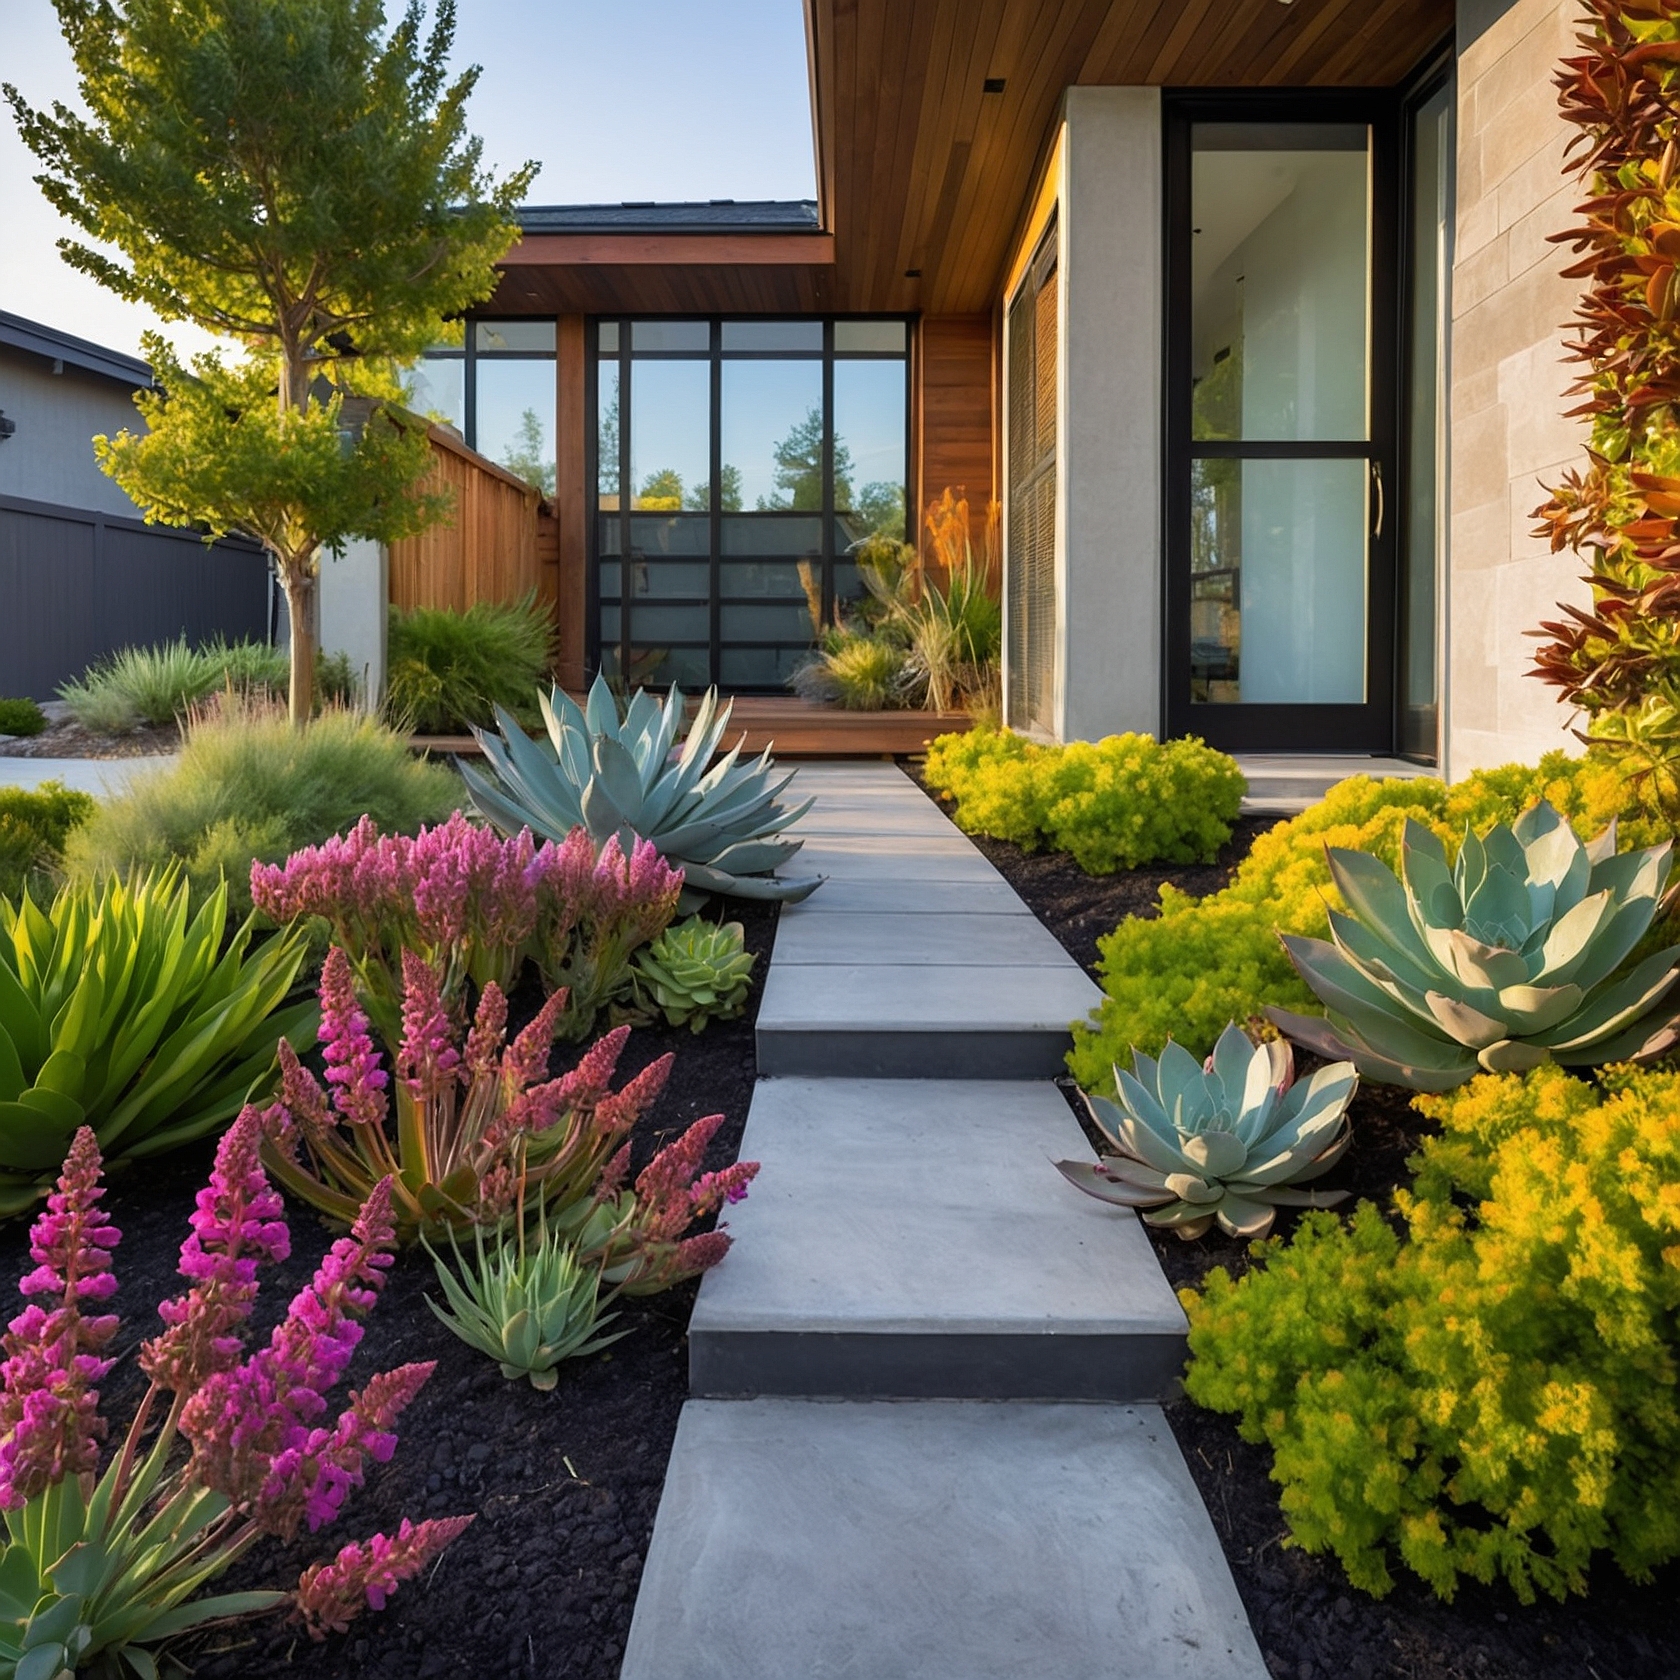 Stepped Walkway With Sedum, Salvia and Agave Plants